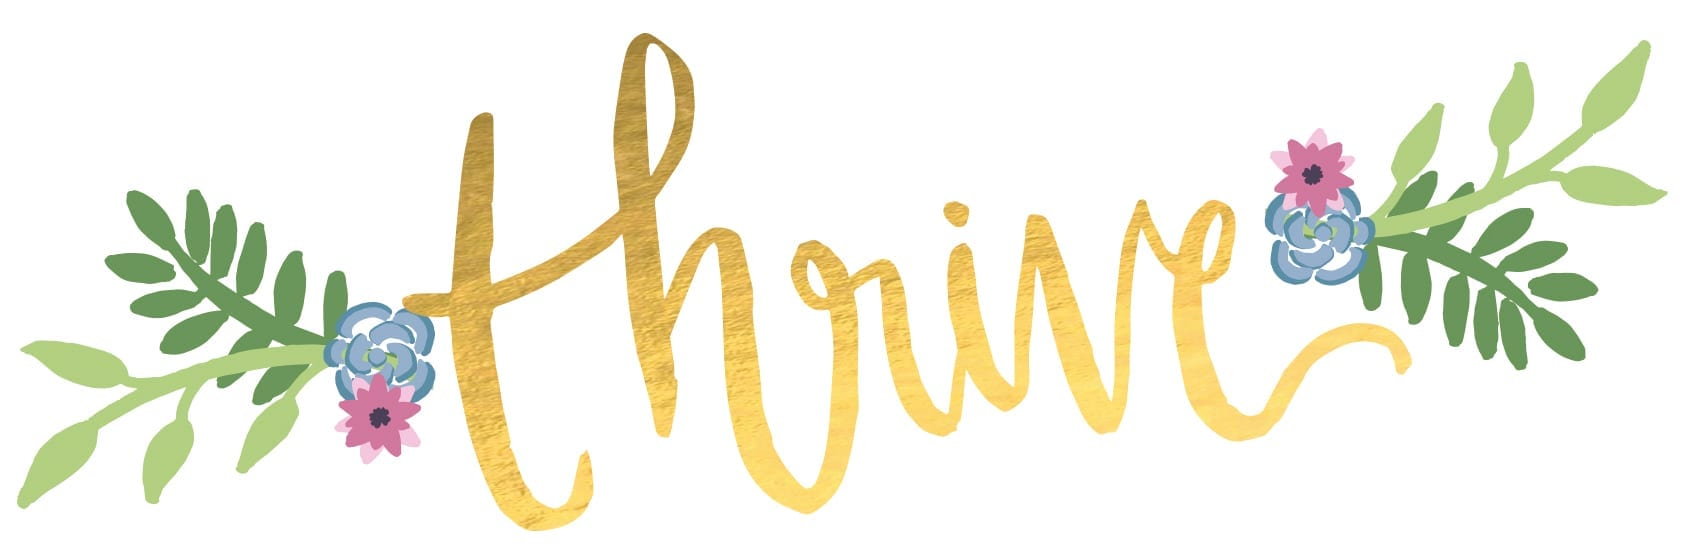 What Makes You Thrive? - A Note From Our Intern - BumbleBar